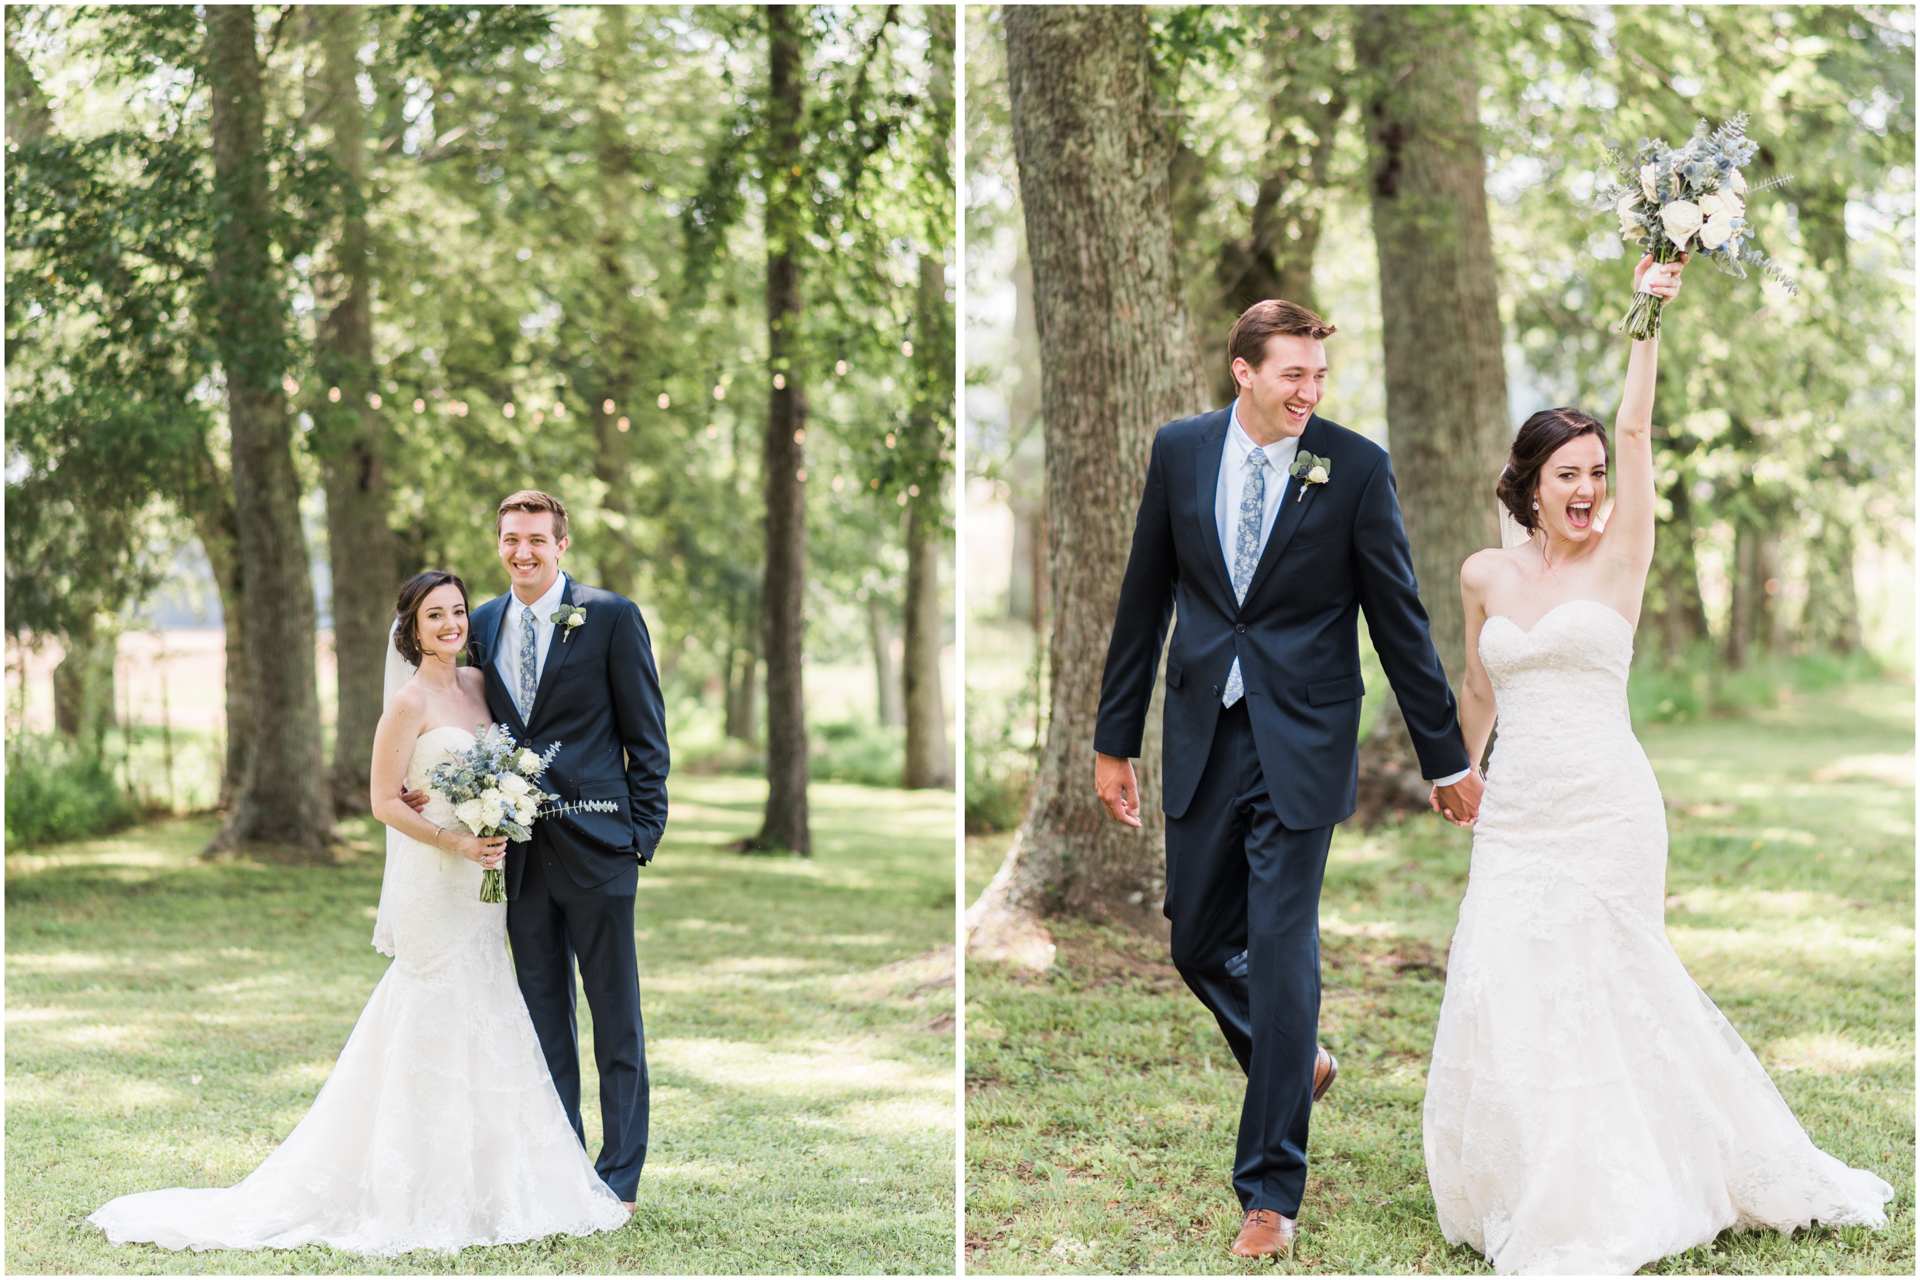 Traditional Outdoor bride and groom portrait - Walking photo with bride celebrating with her bouquet in the air